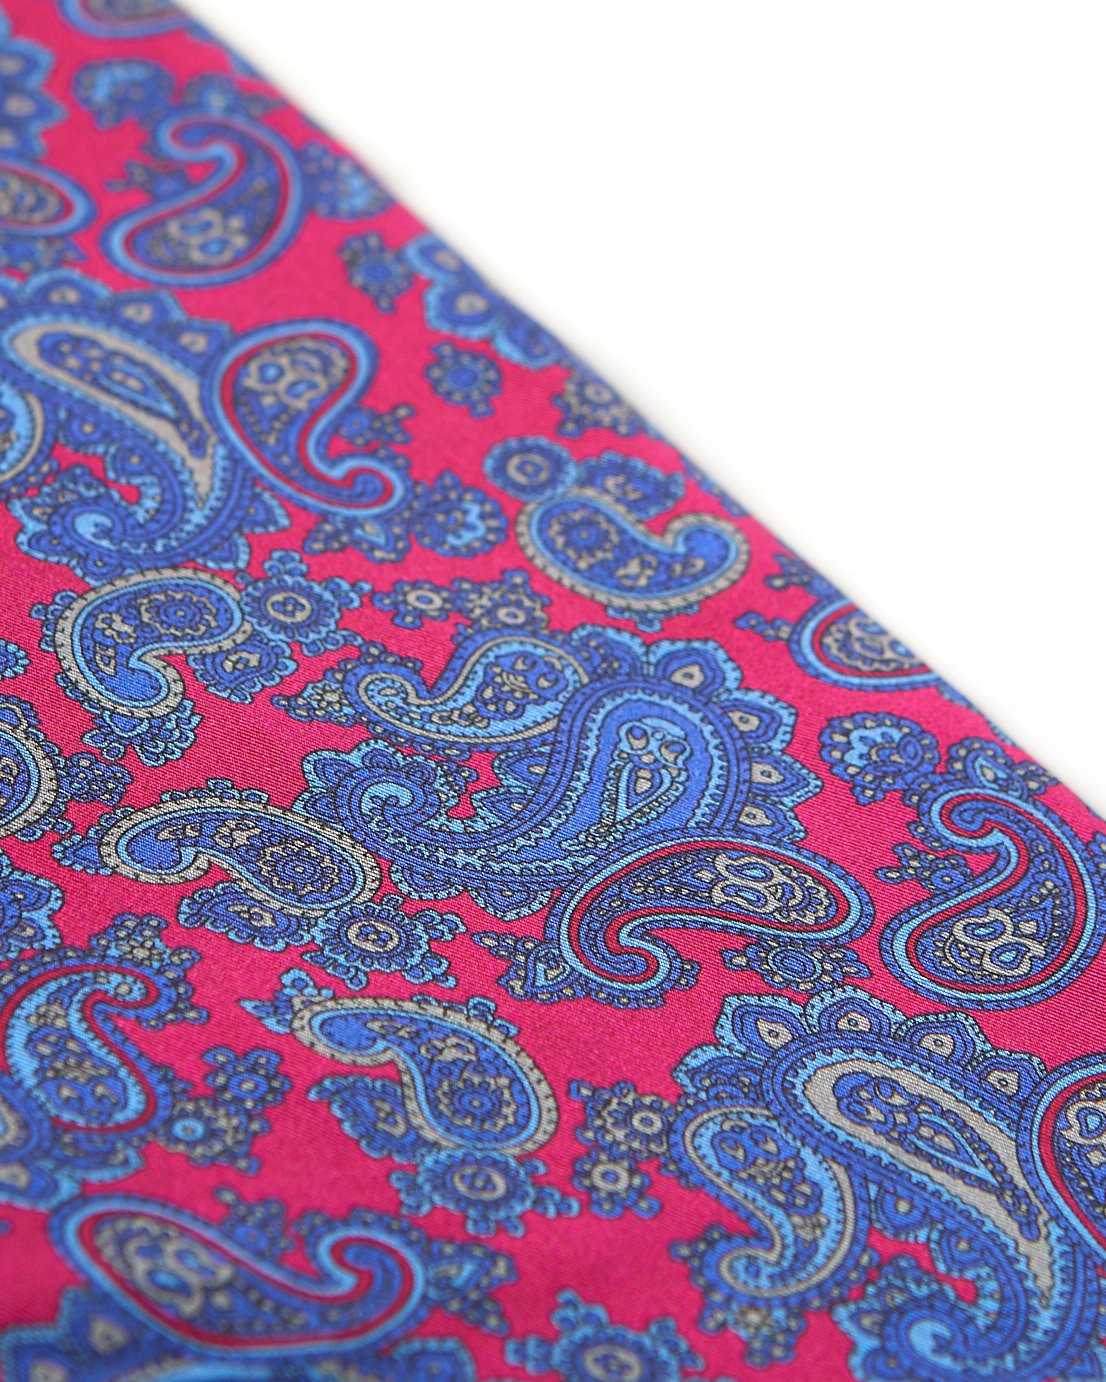 Angled view of the bright pink-red fabric with blue paisley patterns highlighted with pale grey accents.